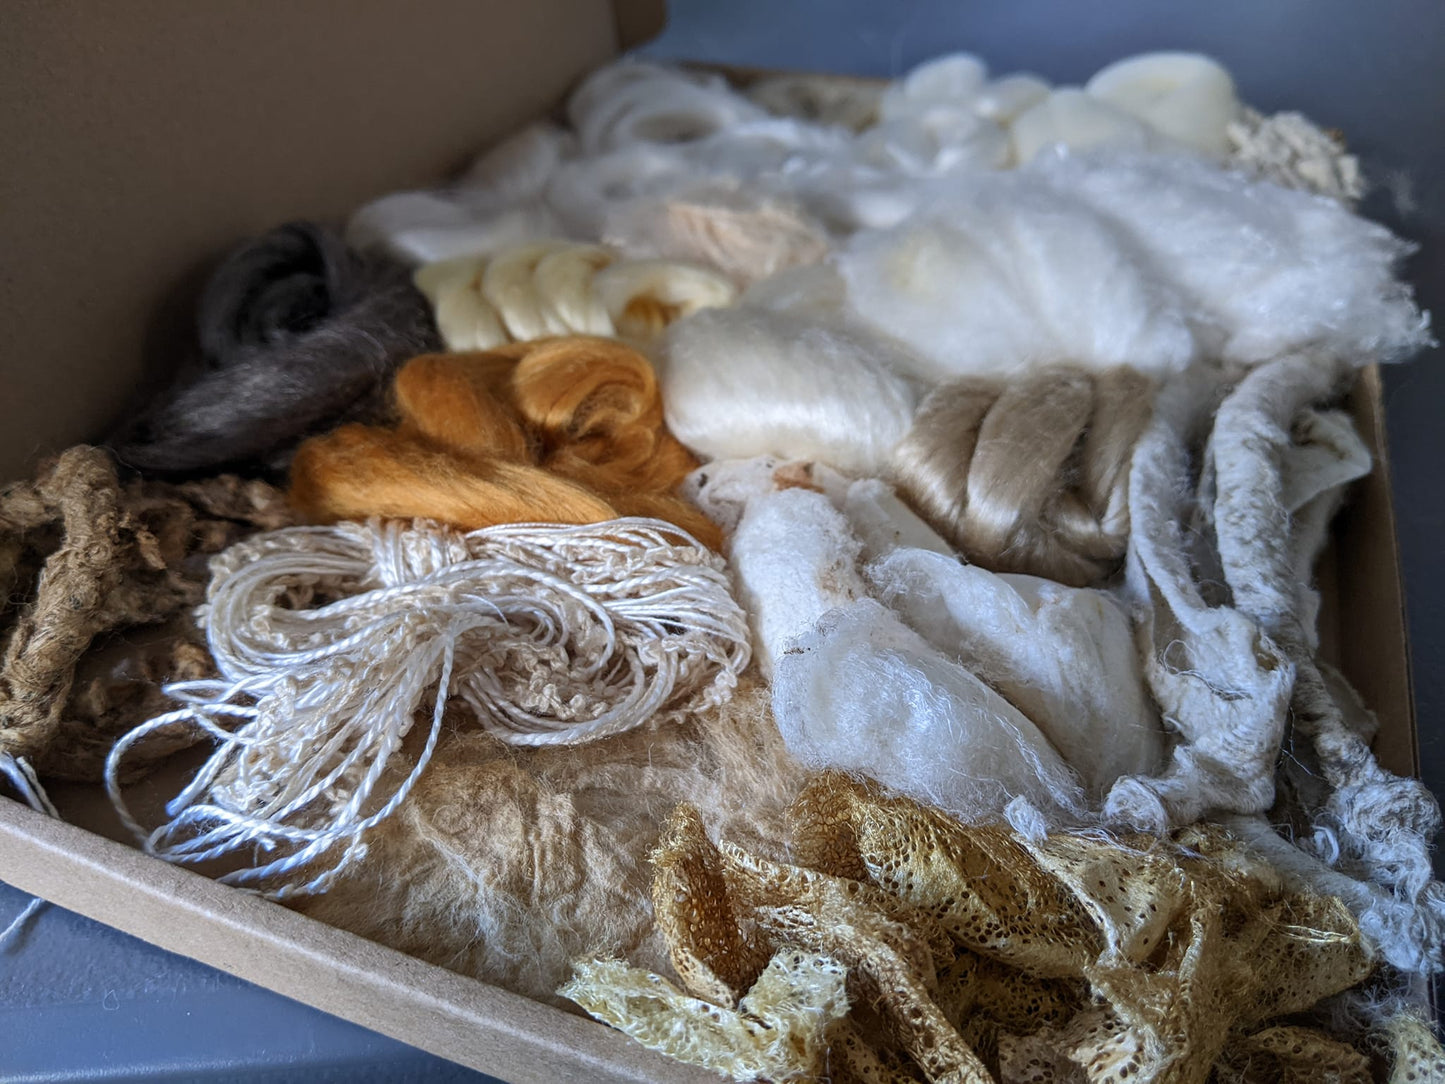 Extra luxurious and unusual110g natural silk/cashmere/plant experimental pack, ideal to dye/natural projects